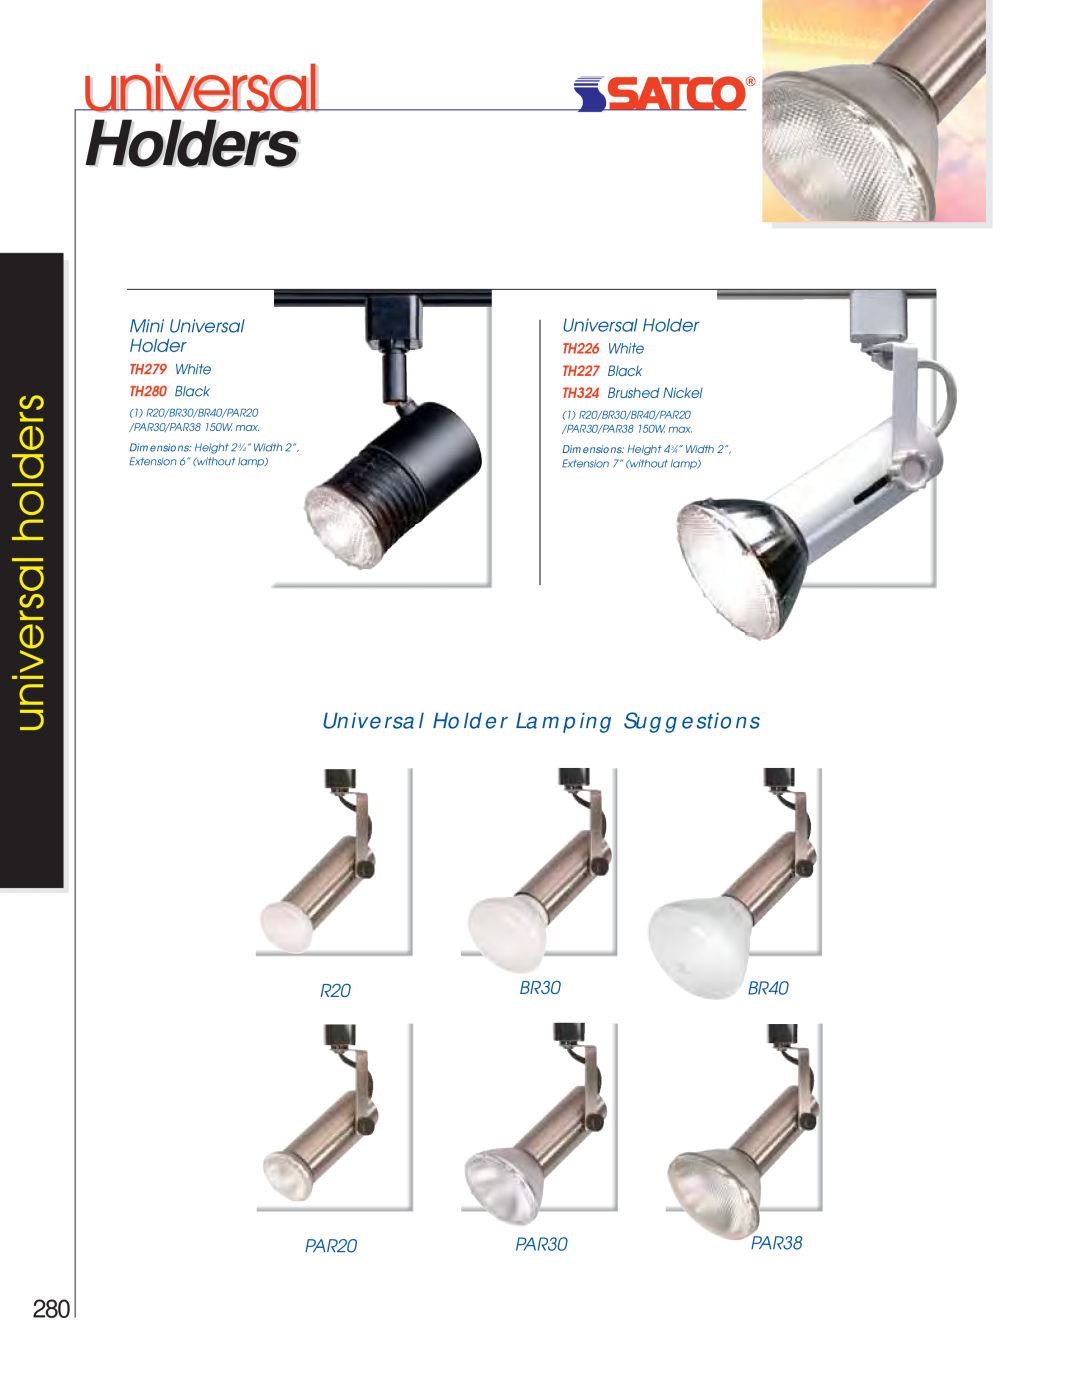 Satco Products R20 Soft Square Holders, universal holders, Universal Holder Lamping Suggestions, Mini Universal Holder 